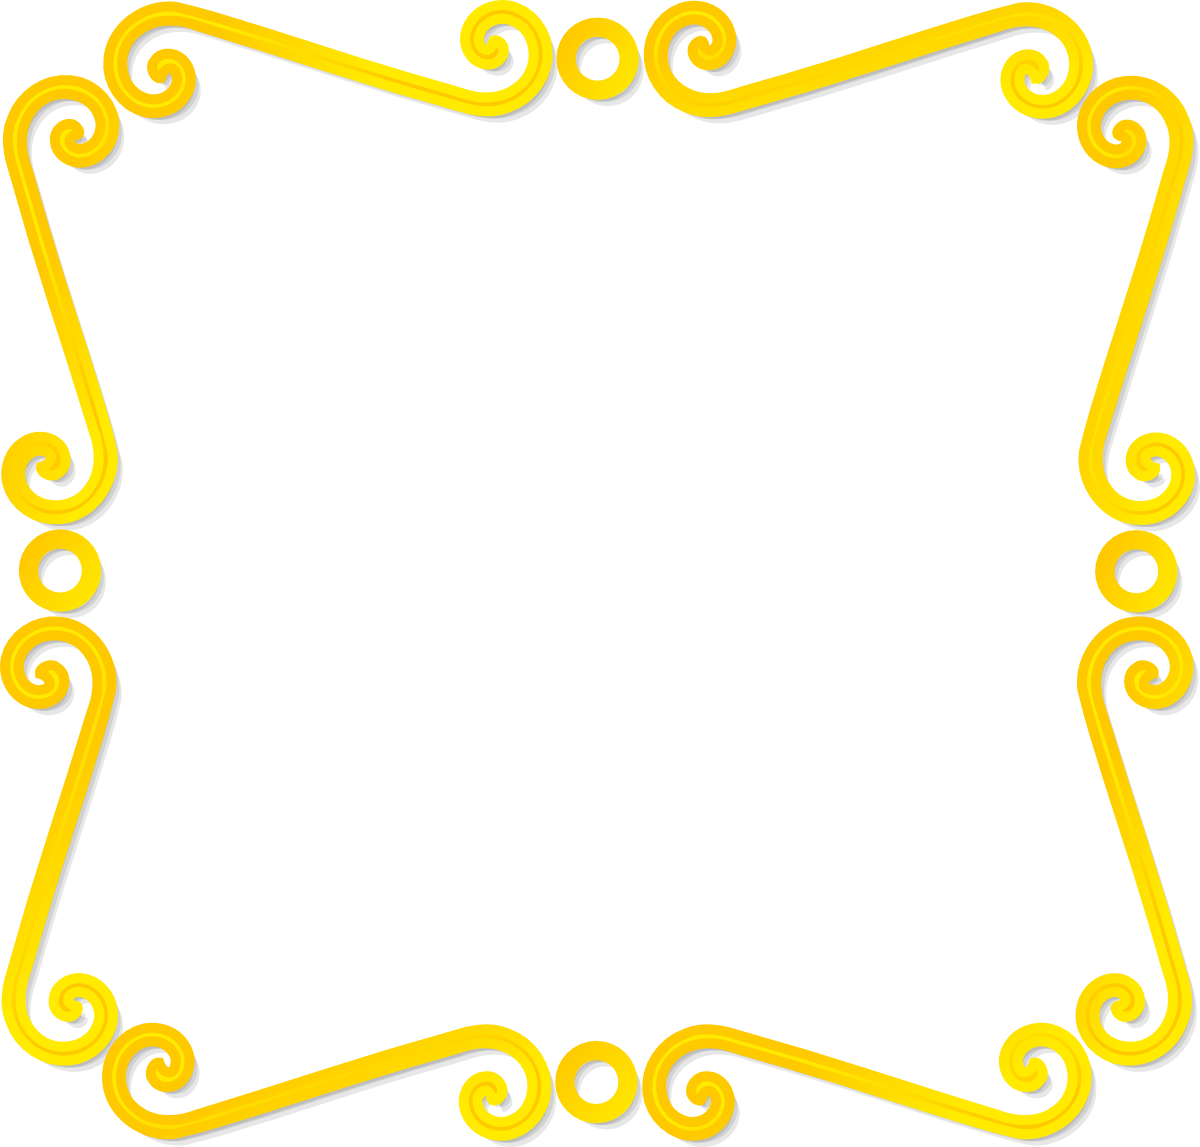 Gold Page Border - Wizard Of Oz Border (3973x3798)